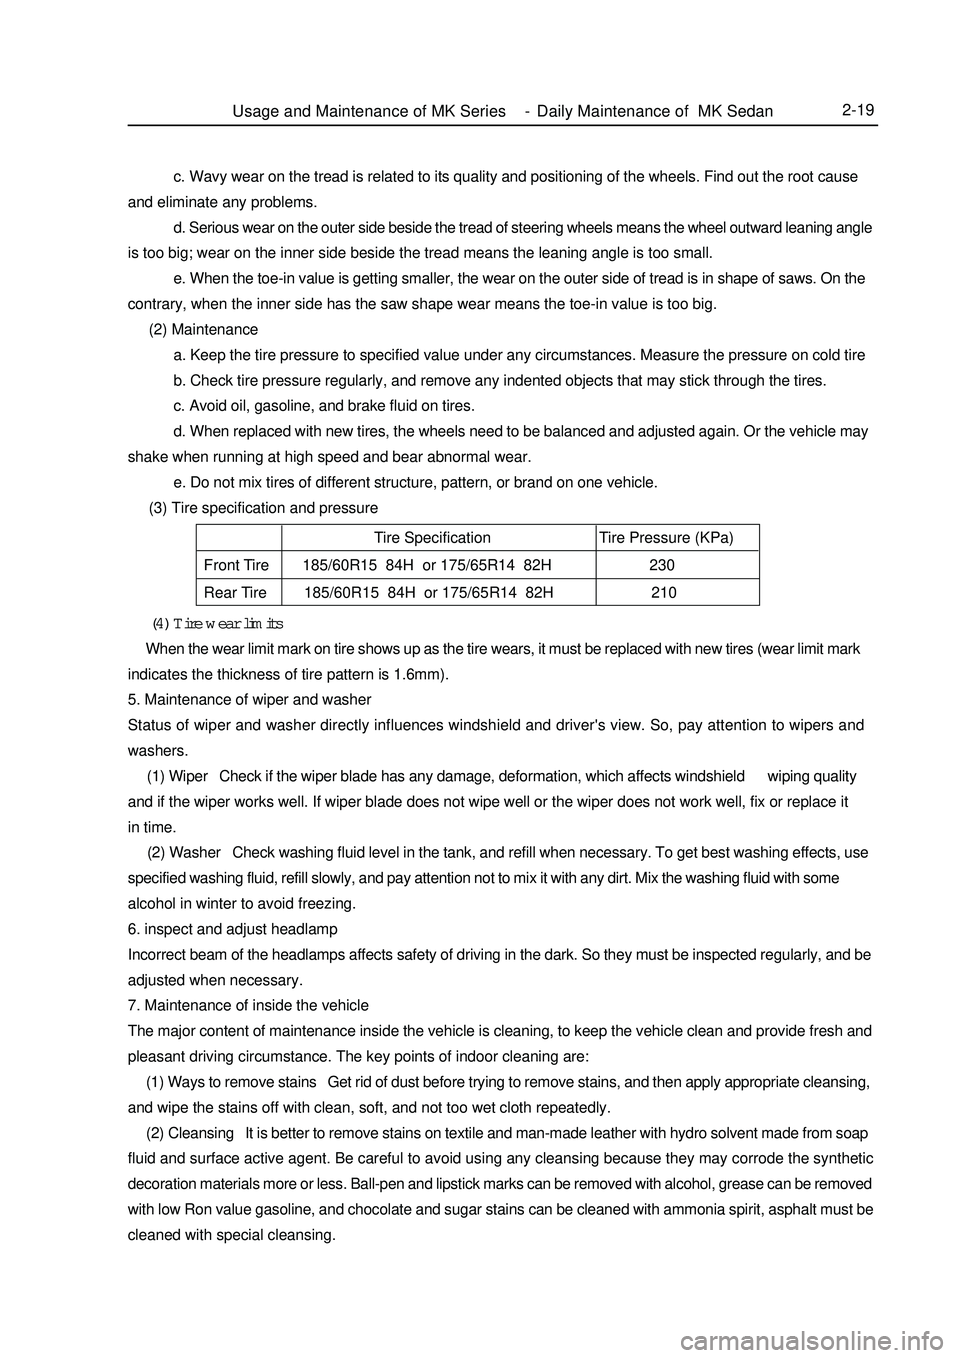 GEELY MK 2008  Workshop Manual 2-19     (4) Tire wear limits     When the wear limit mark on tire shows up as the tire wears, it must be replaced with new tires (wear limit mark
indicates the thickness of tire pattern is 1.6mm).
5.